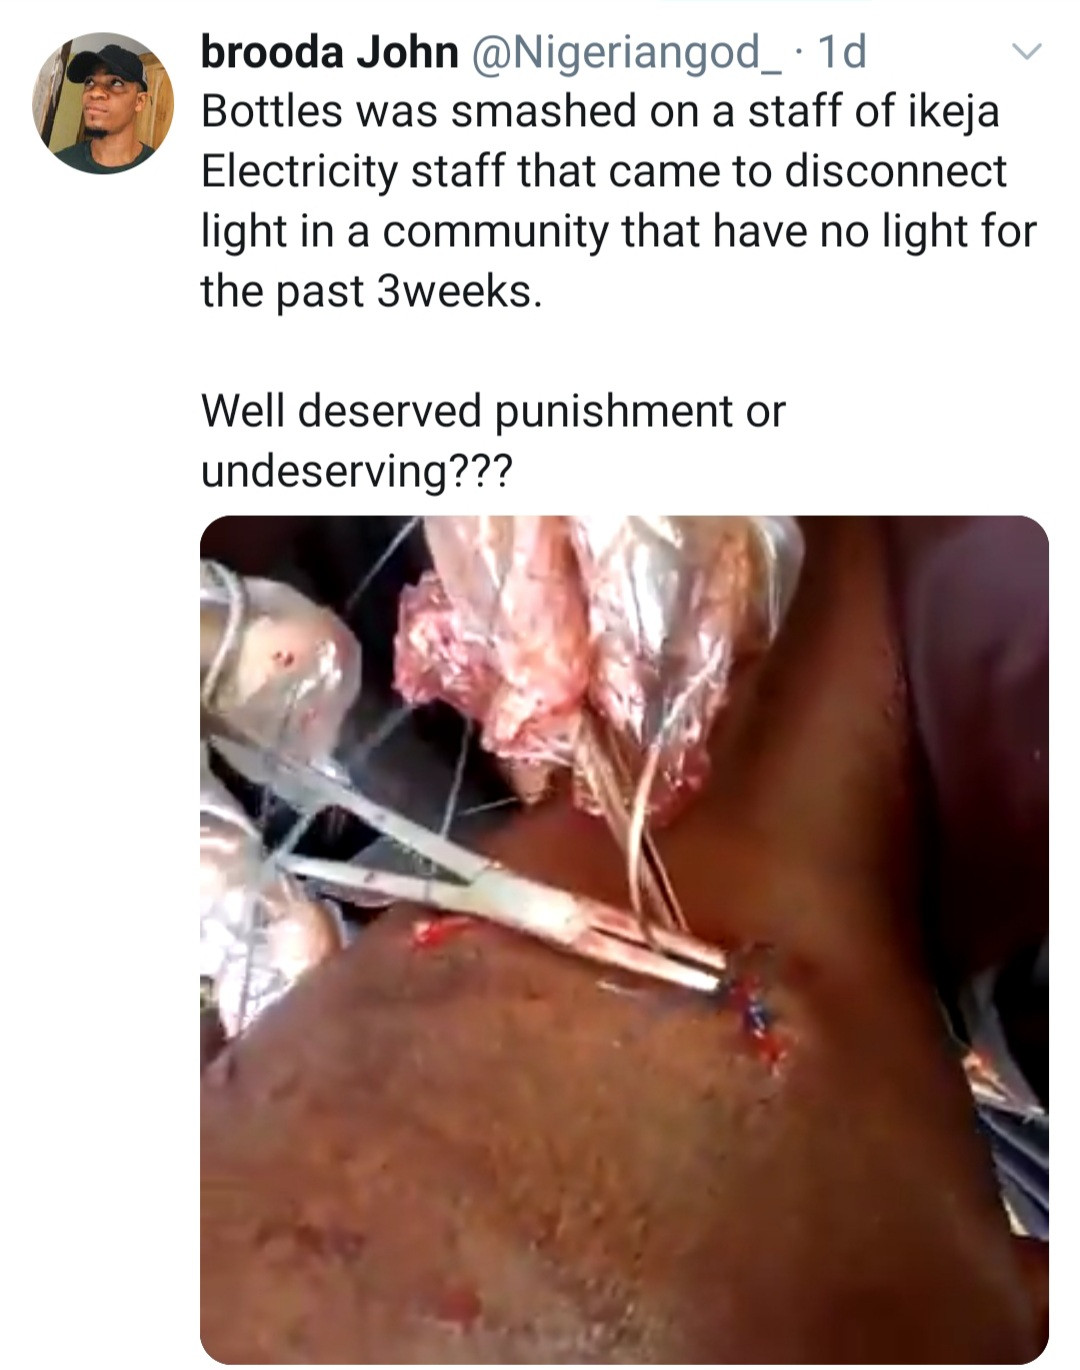 ikedc staff stabbed on the head with bottle when he tried to disconnect power from a community video 1